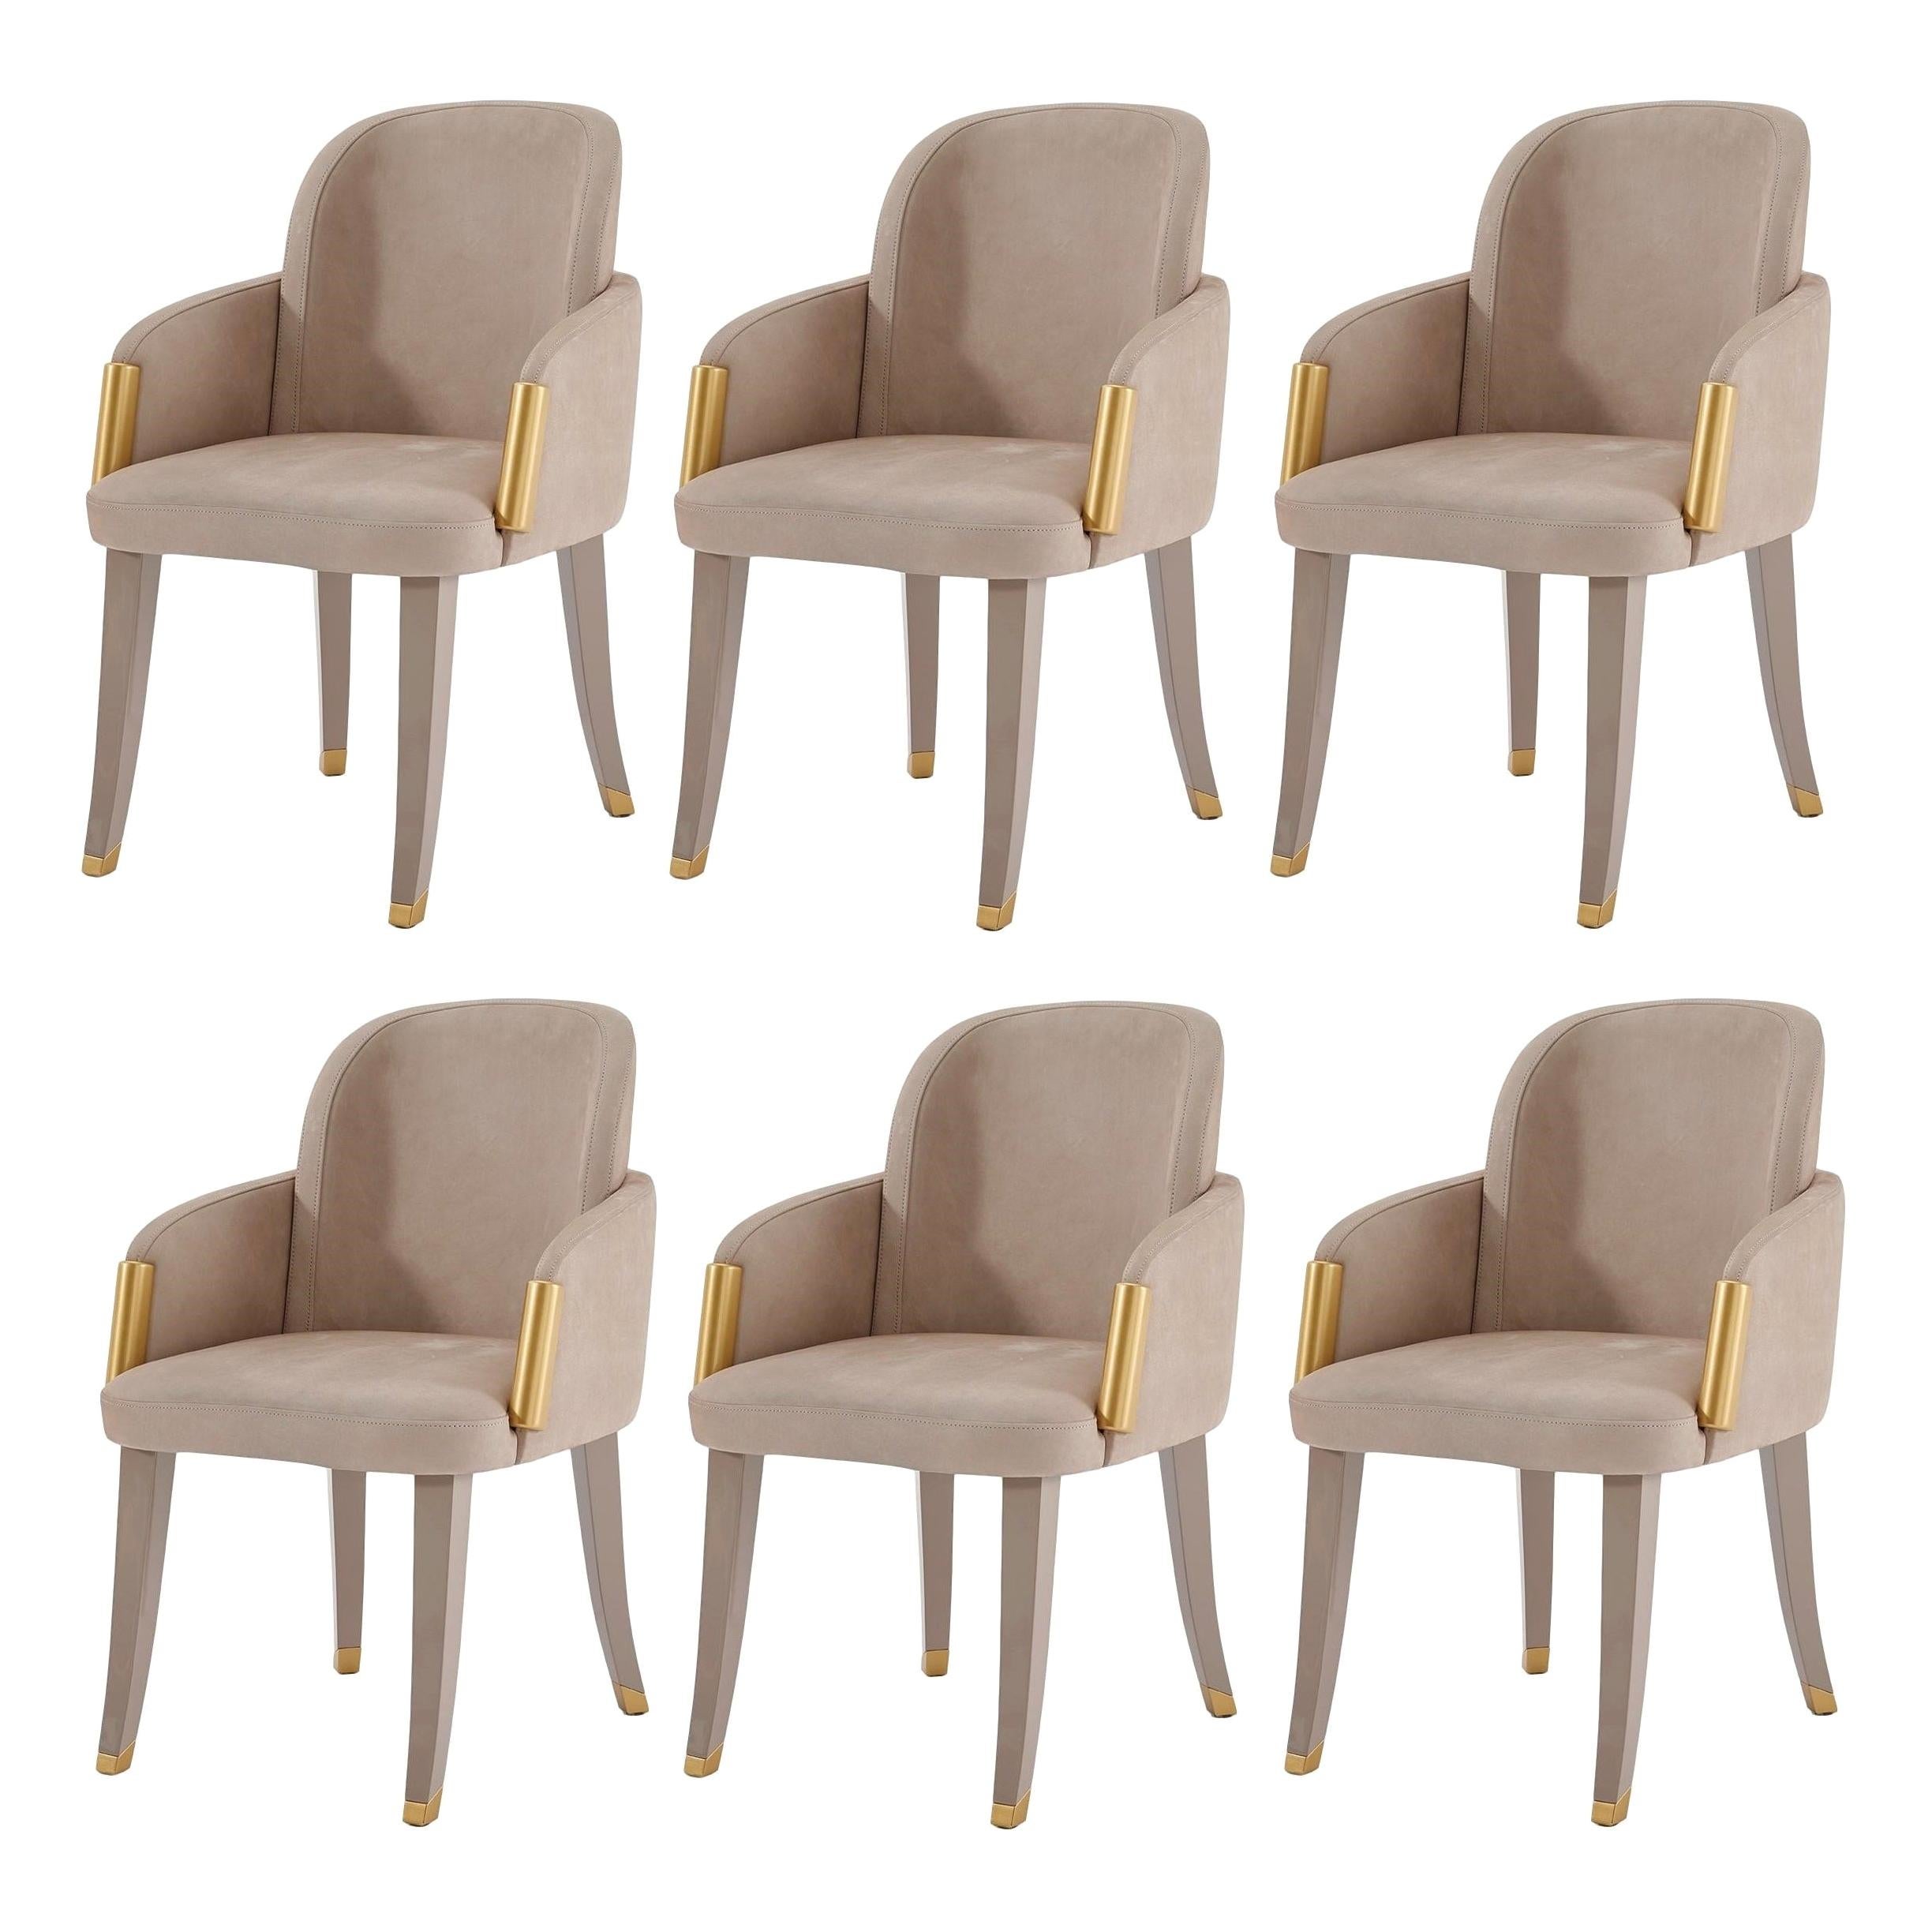 Set of 6 Couture Dining Chairs, Grey Beige Oak/Plated Gold